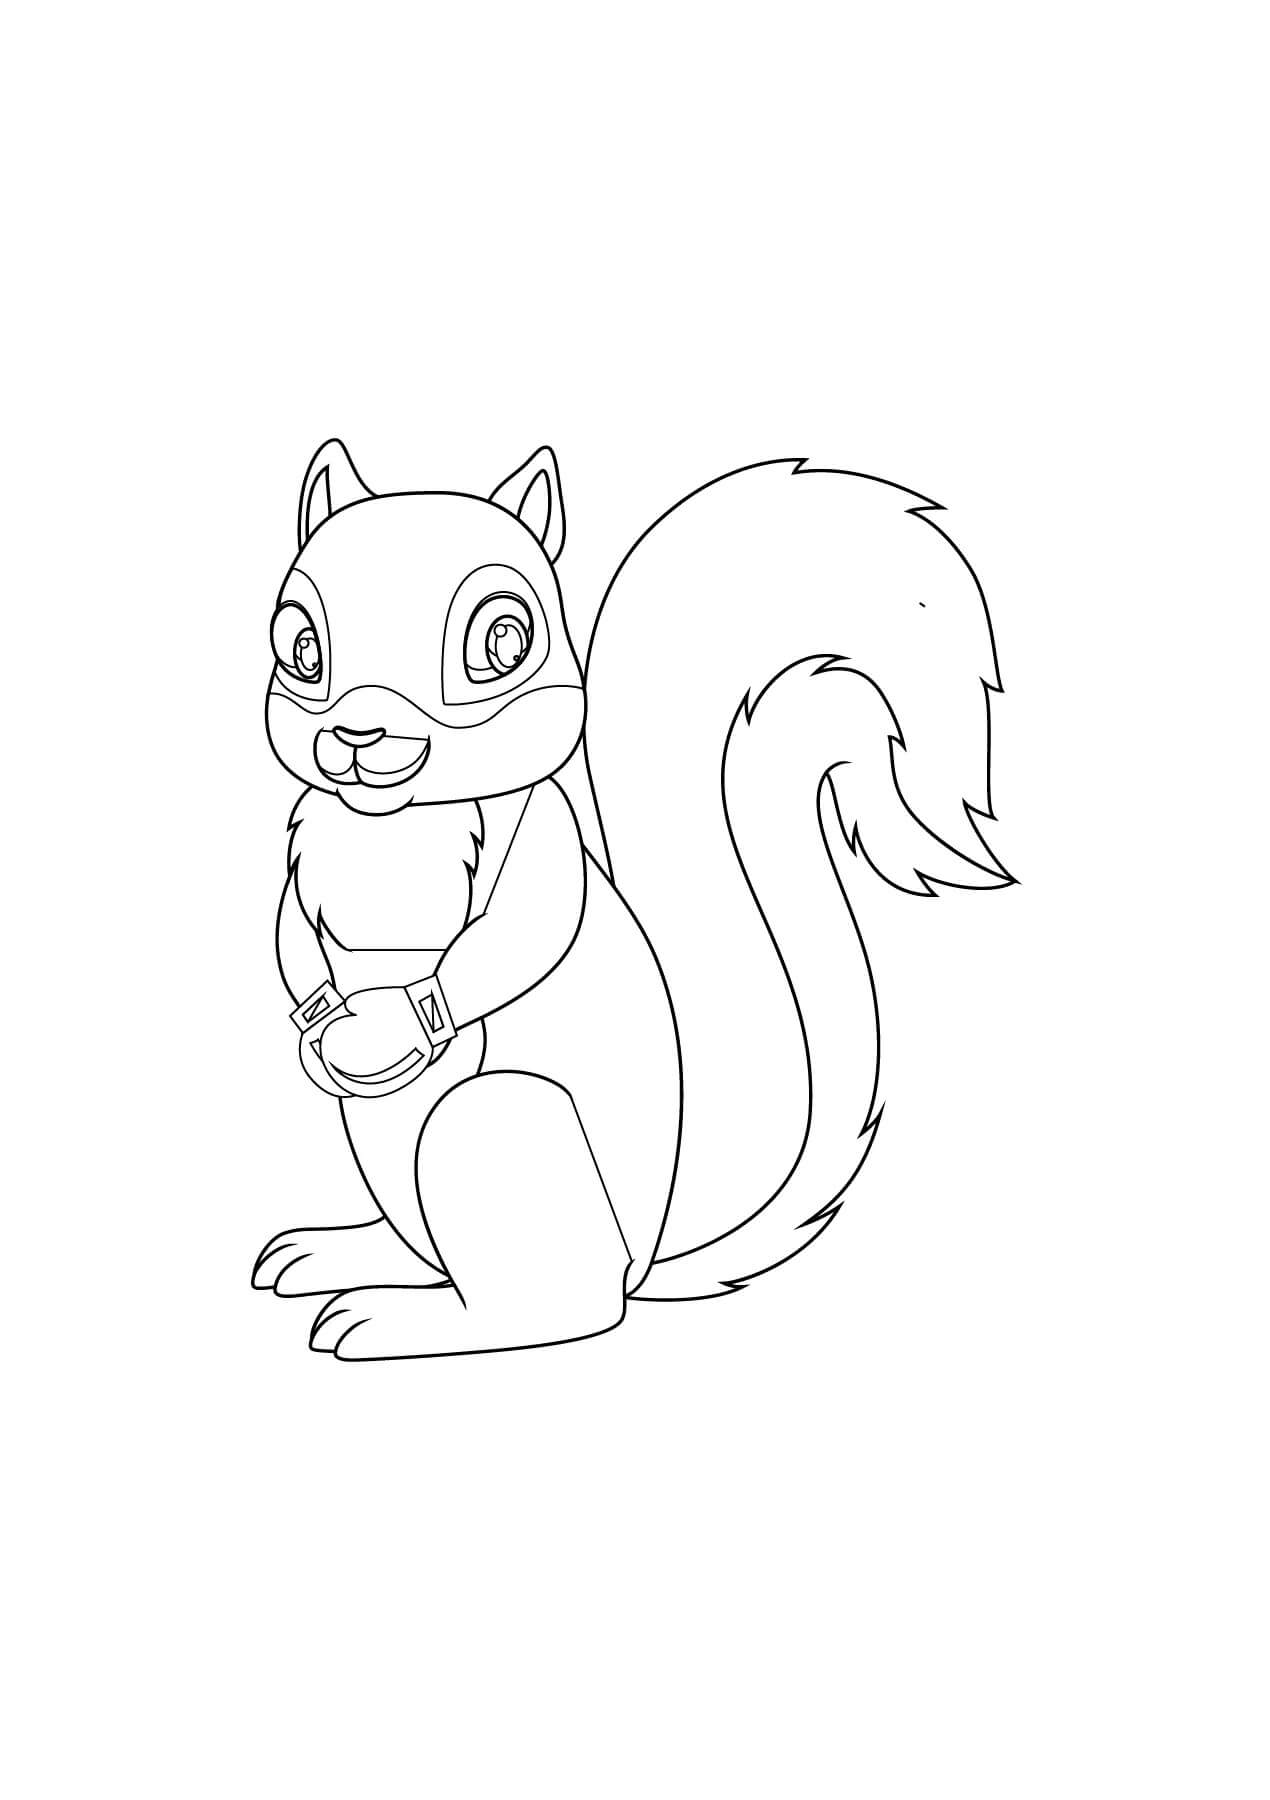 Squirrel wearing Boxing Gloves coloring page - Download, Print or Color ...